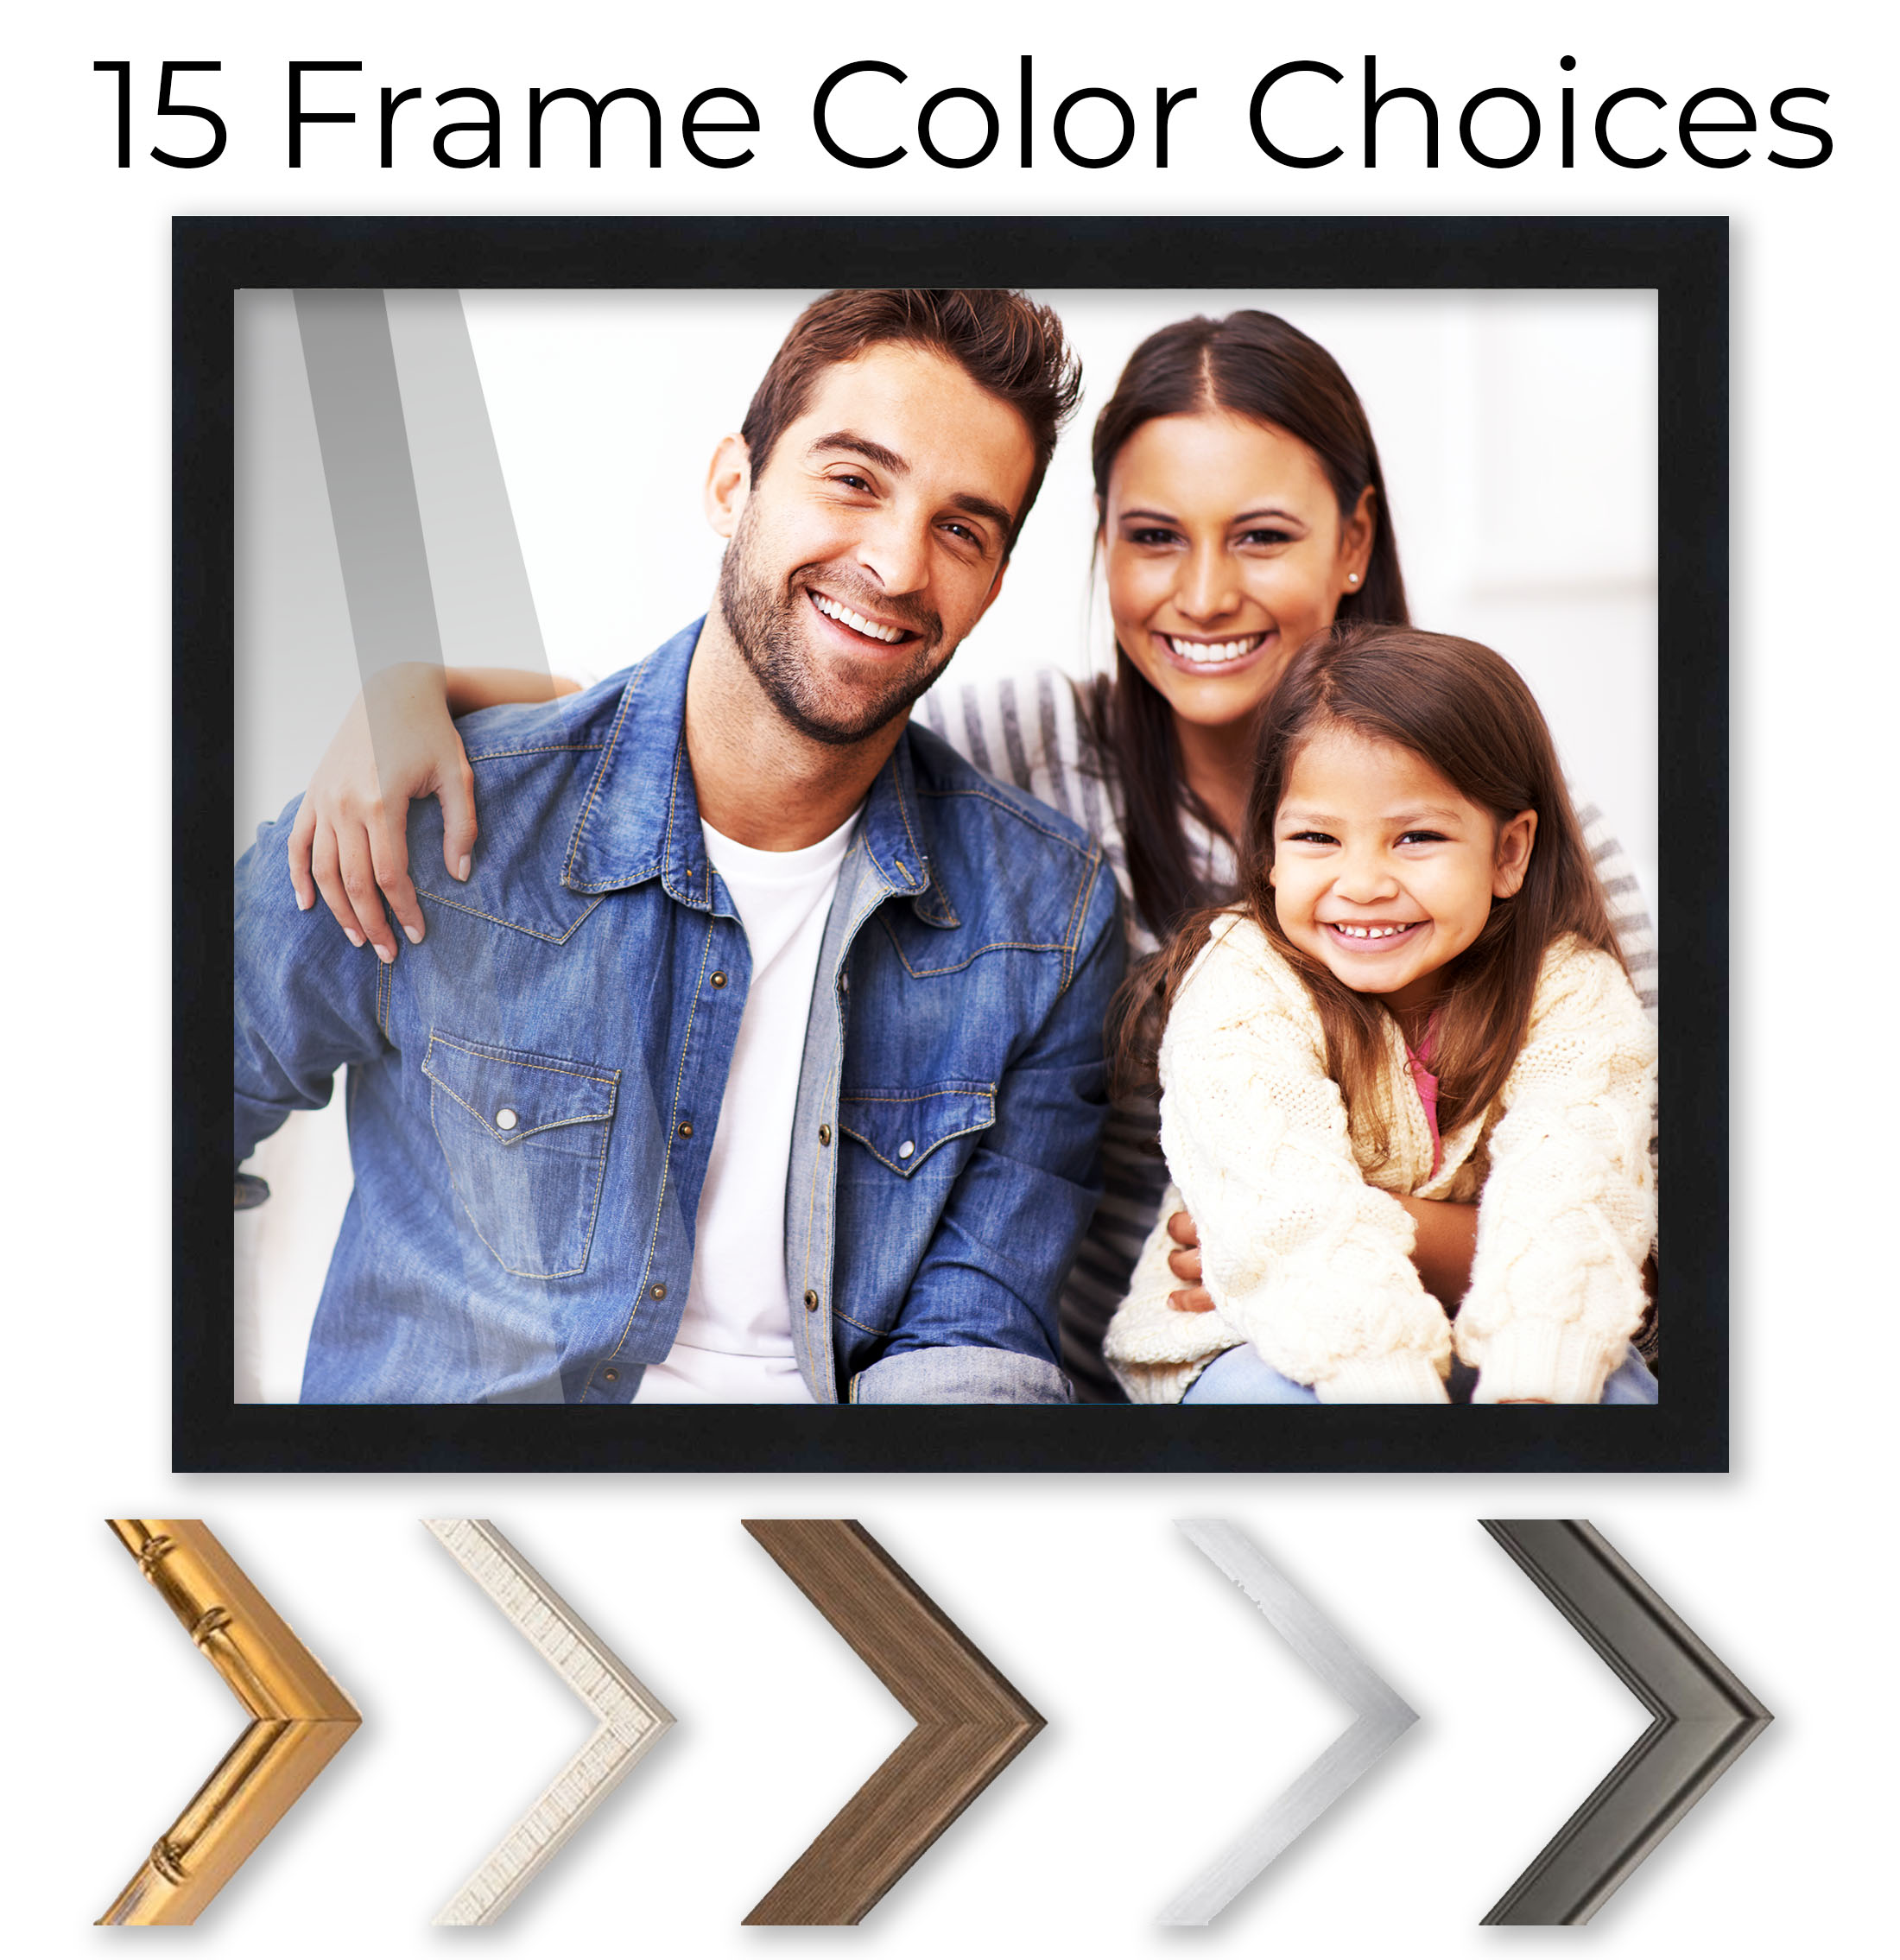 CustomPictureFrames.com 12x13 Picture Frame - Wood Picture Frame with UV Acrylic, Foam Board Backing, & Hanging Hardware